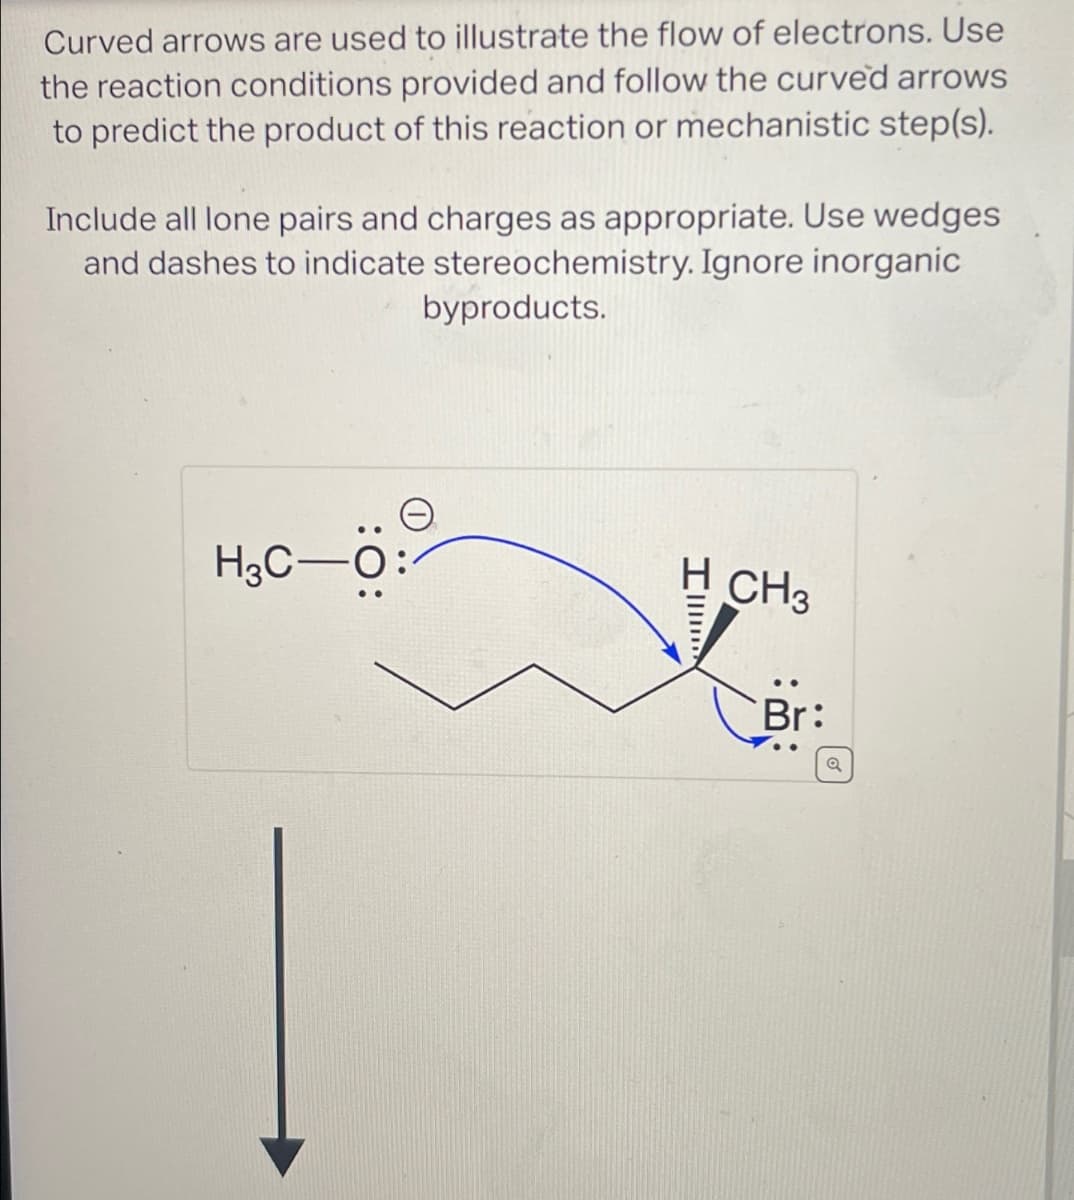 Curved arrows are used to illustrate the flow of electrons. Use
the reaction conditions provided and follow the curved arrows
to predict the product of this reaction or mechanistic step(s).
Include all lone pairs and charges as appropriate. Use wedges
and dashes to indicate stereochemistry. Ignore inorganic
byproducts.
H3C-
I
H CH3
Br: